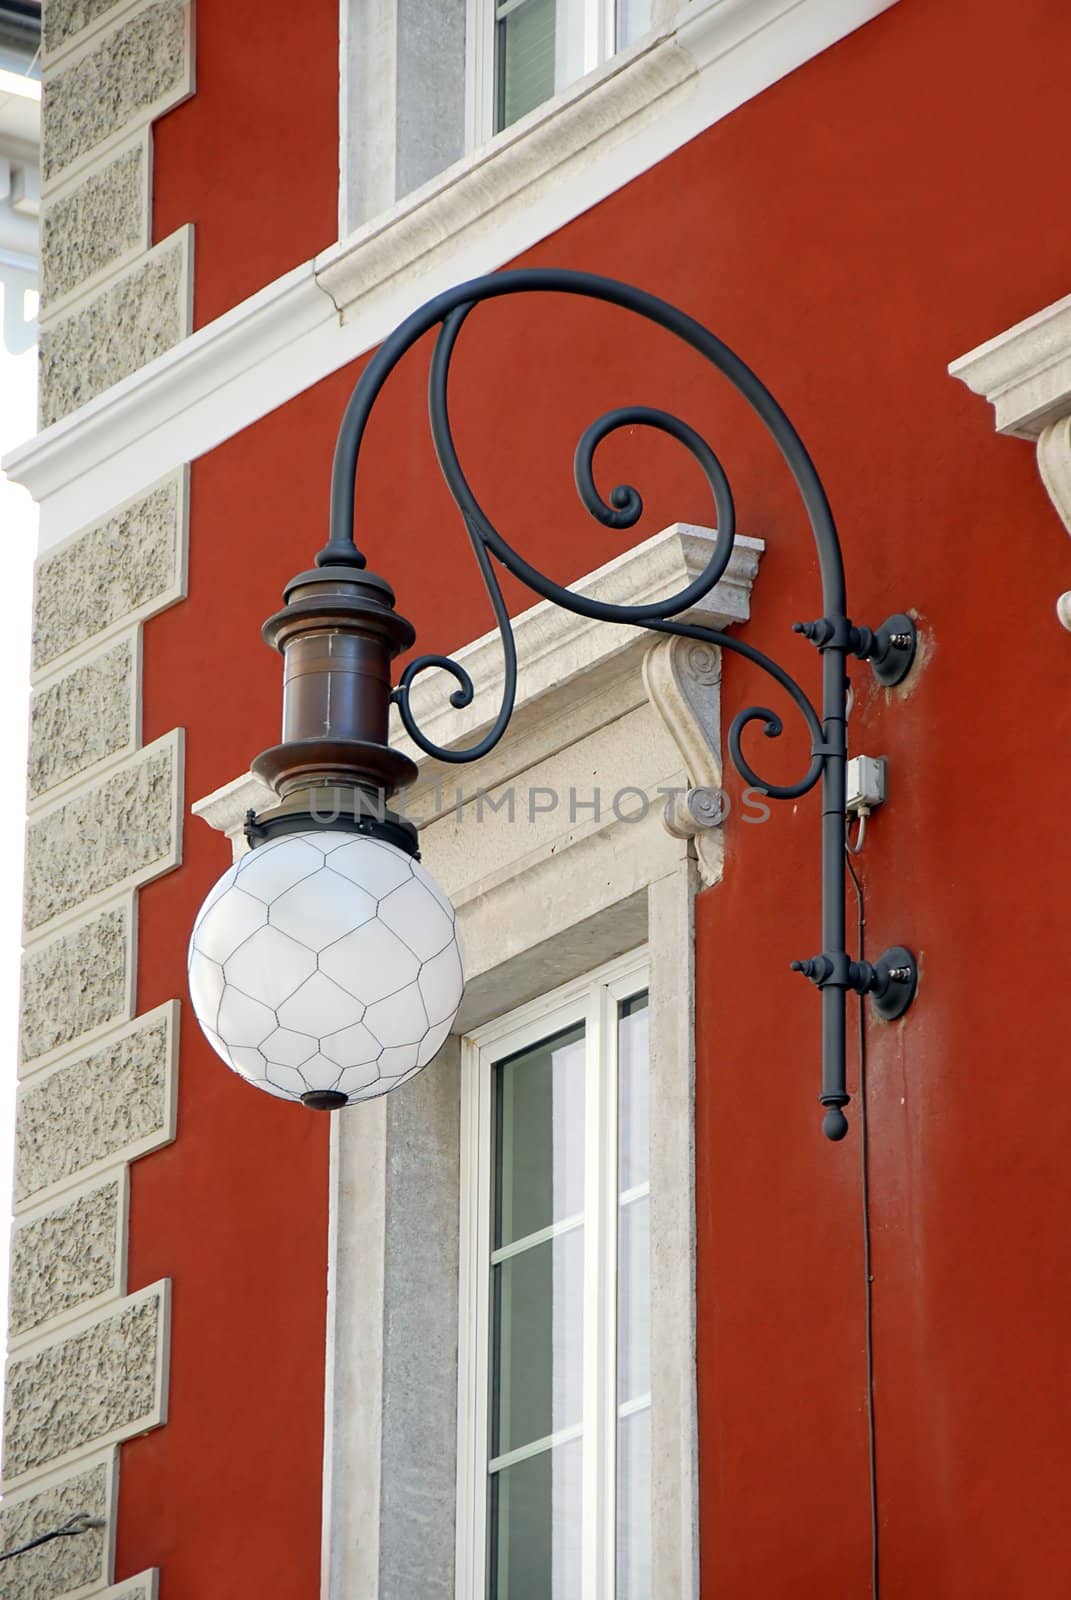 architecture detail, street lamp in Trieste, Italy